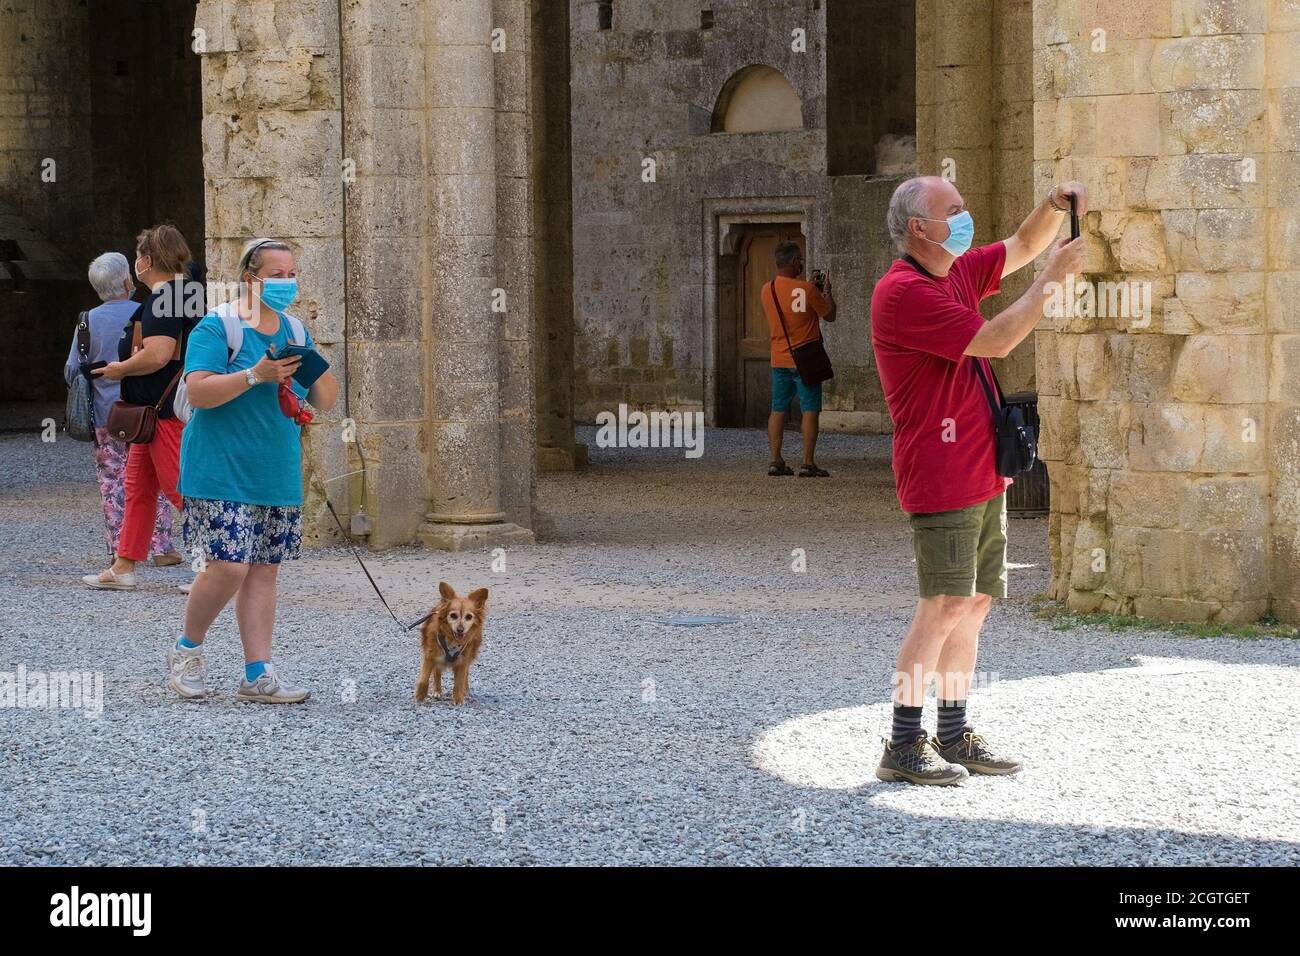 Monticiano, Italy - Sept 7th 2020. Tourists wearing masks take photos in the historic roofless 13th century gothic cistercian abbey of San Galgano Stock Photo